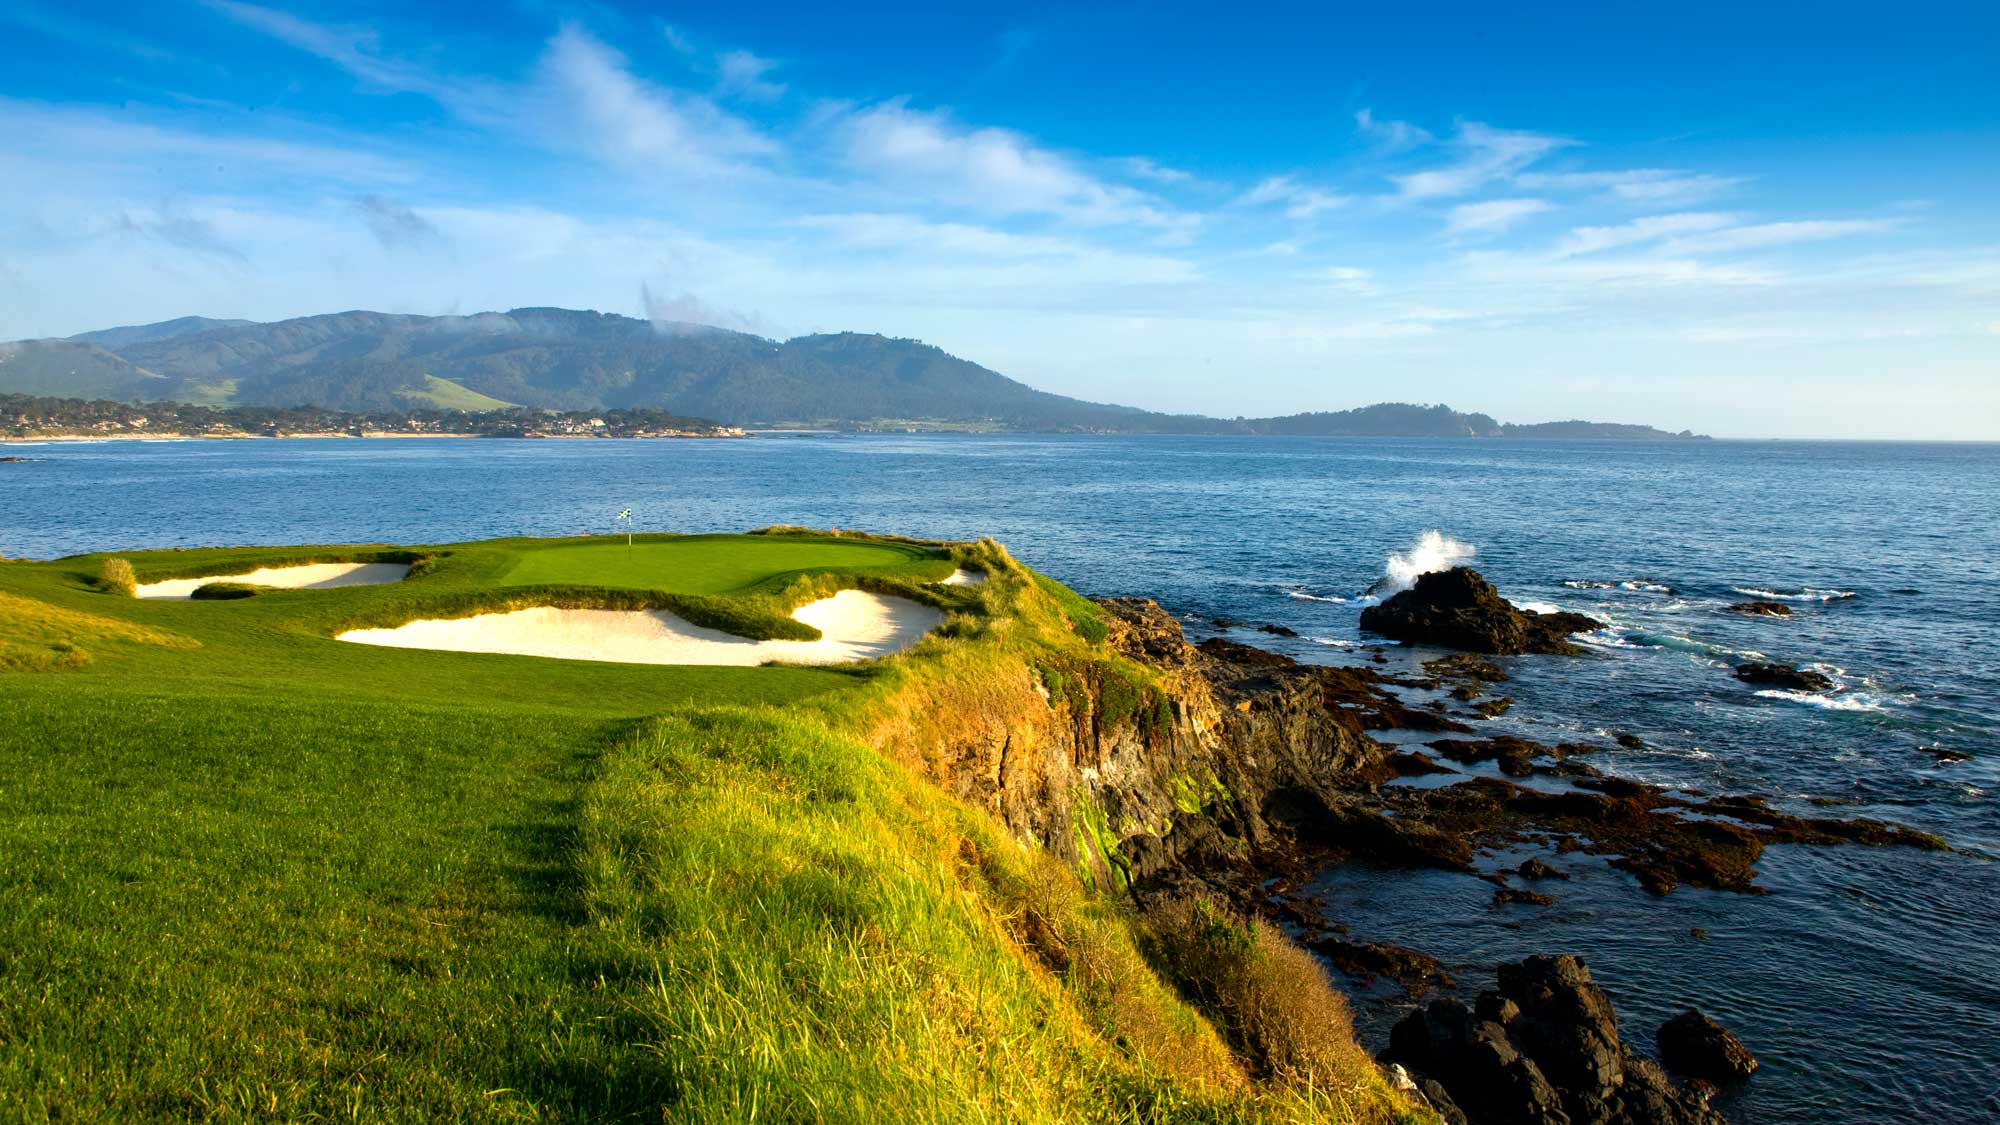 Record Number of Entries Accepted for U.S. Women’s Open at Pebble Beach